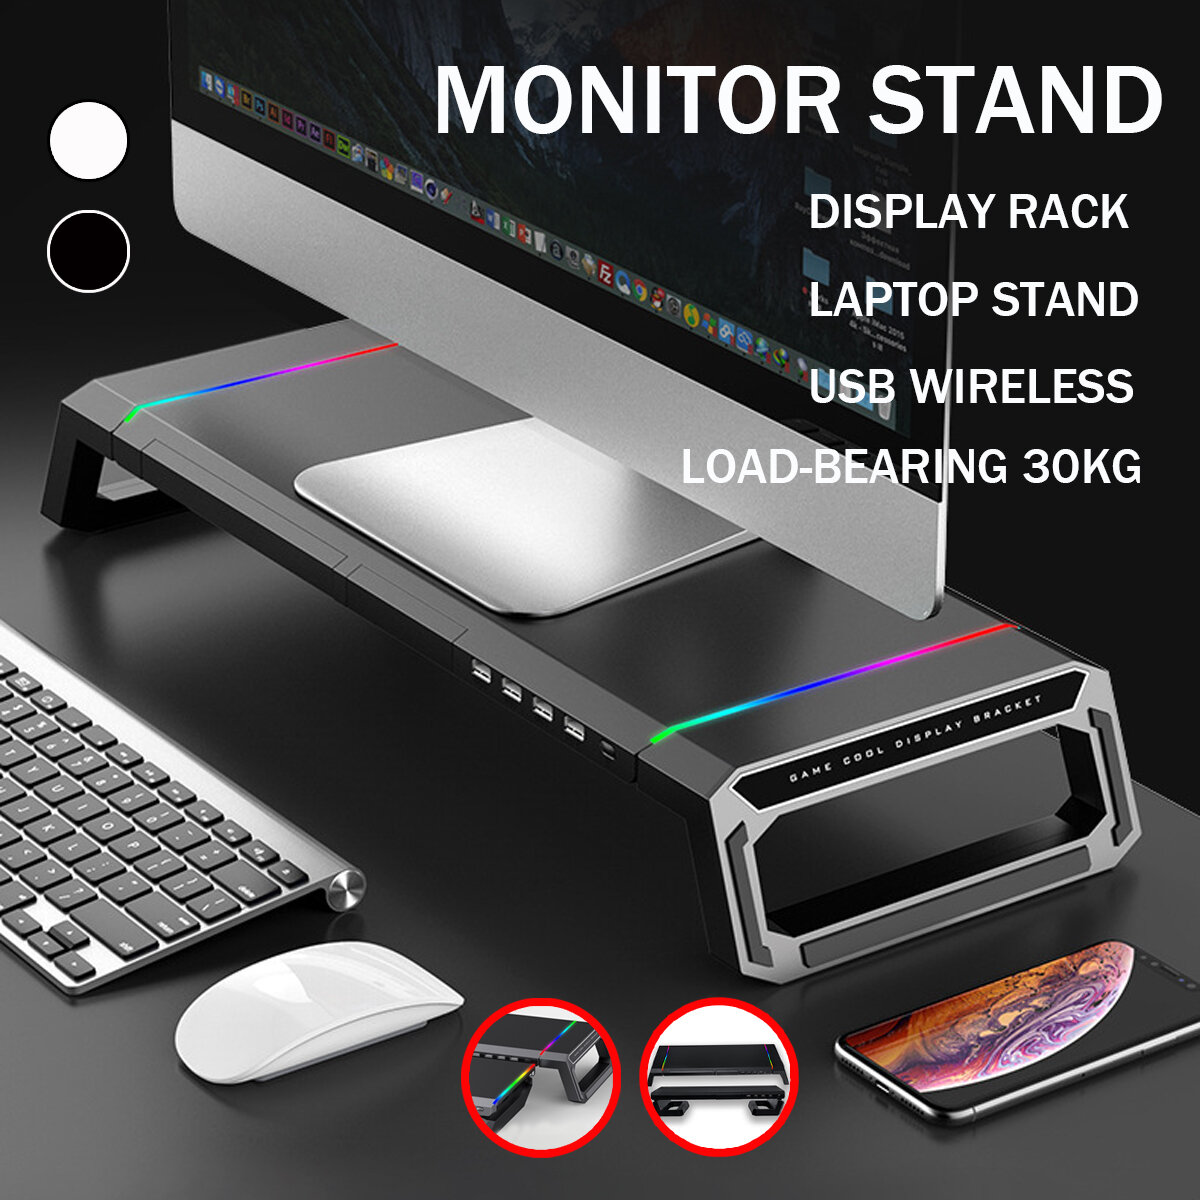 ICECOOREL T1 RGB Lighting for iMac Monitor Riser Stand with 4 USB 3.0 Port Phone Holder Storage Draw